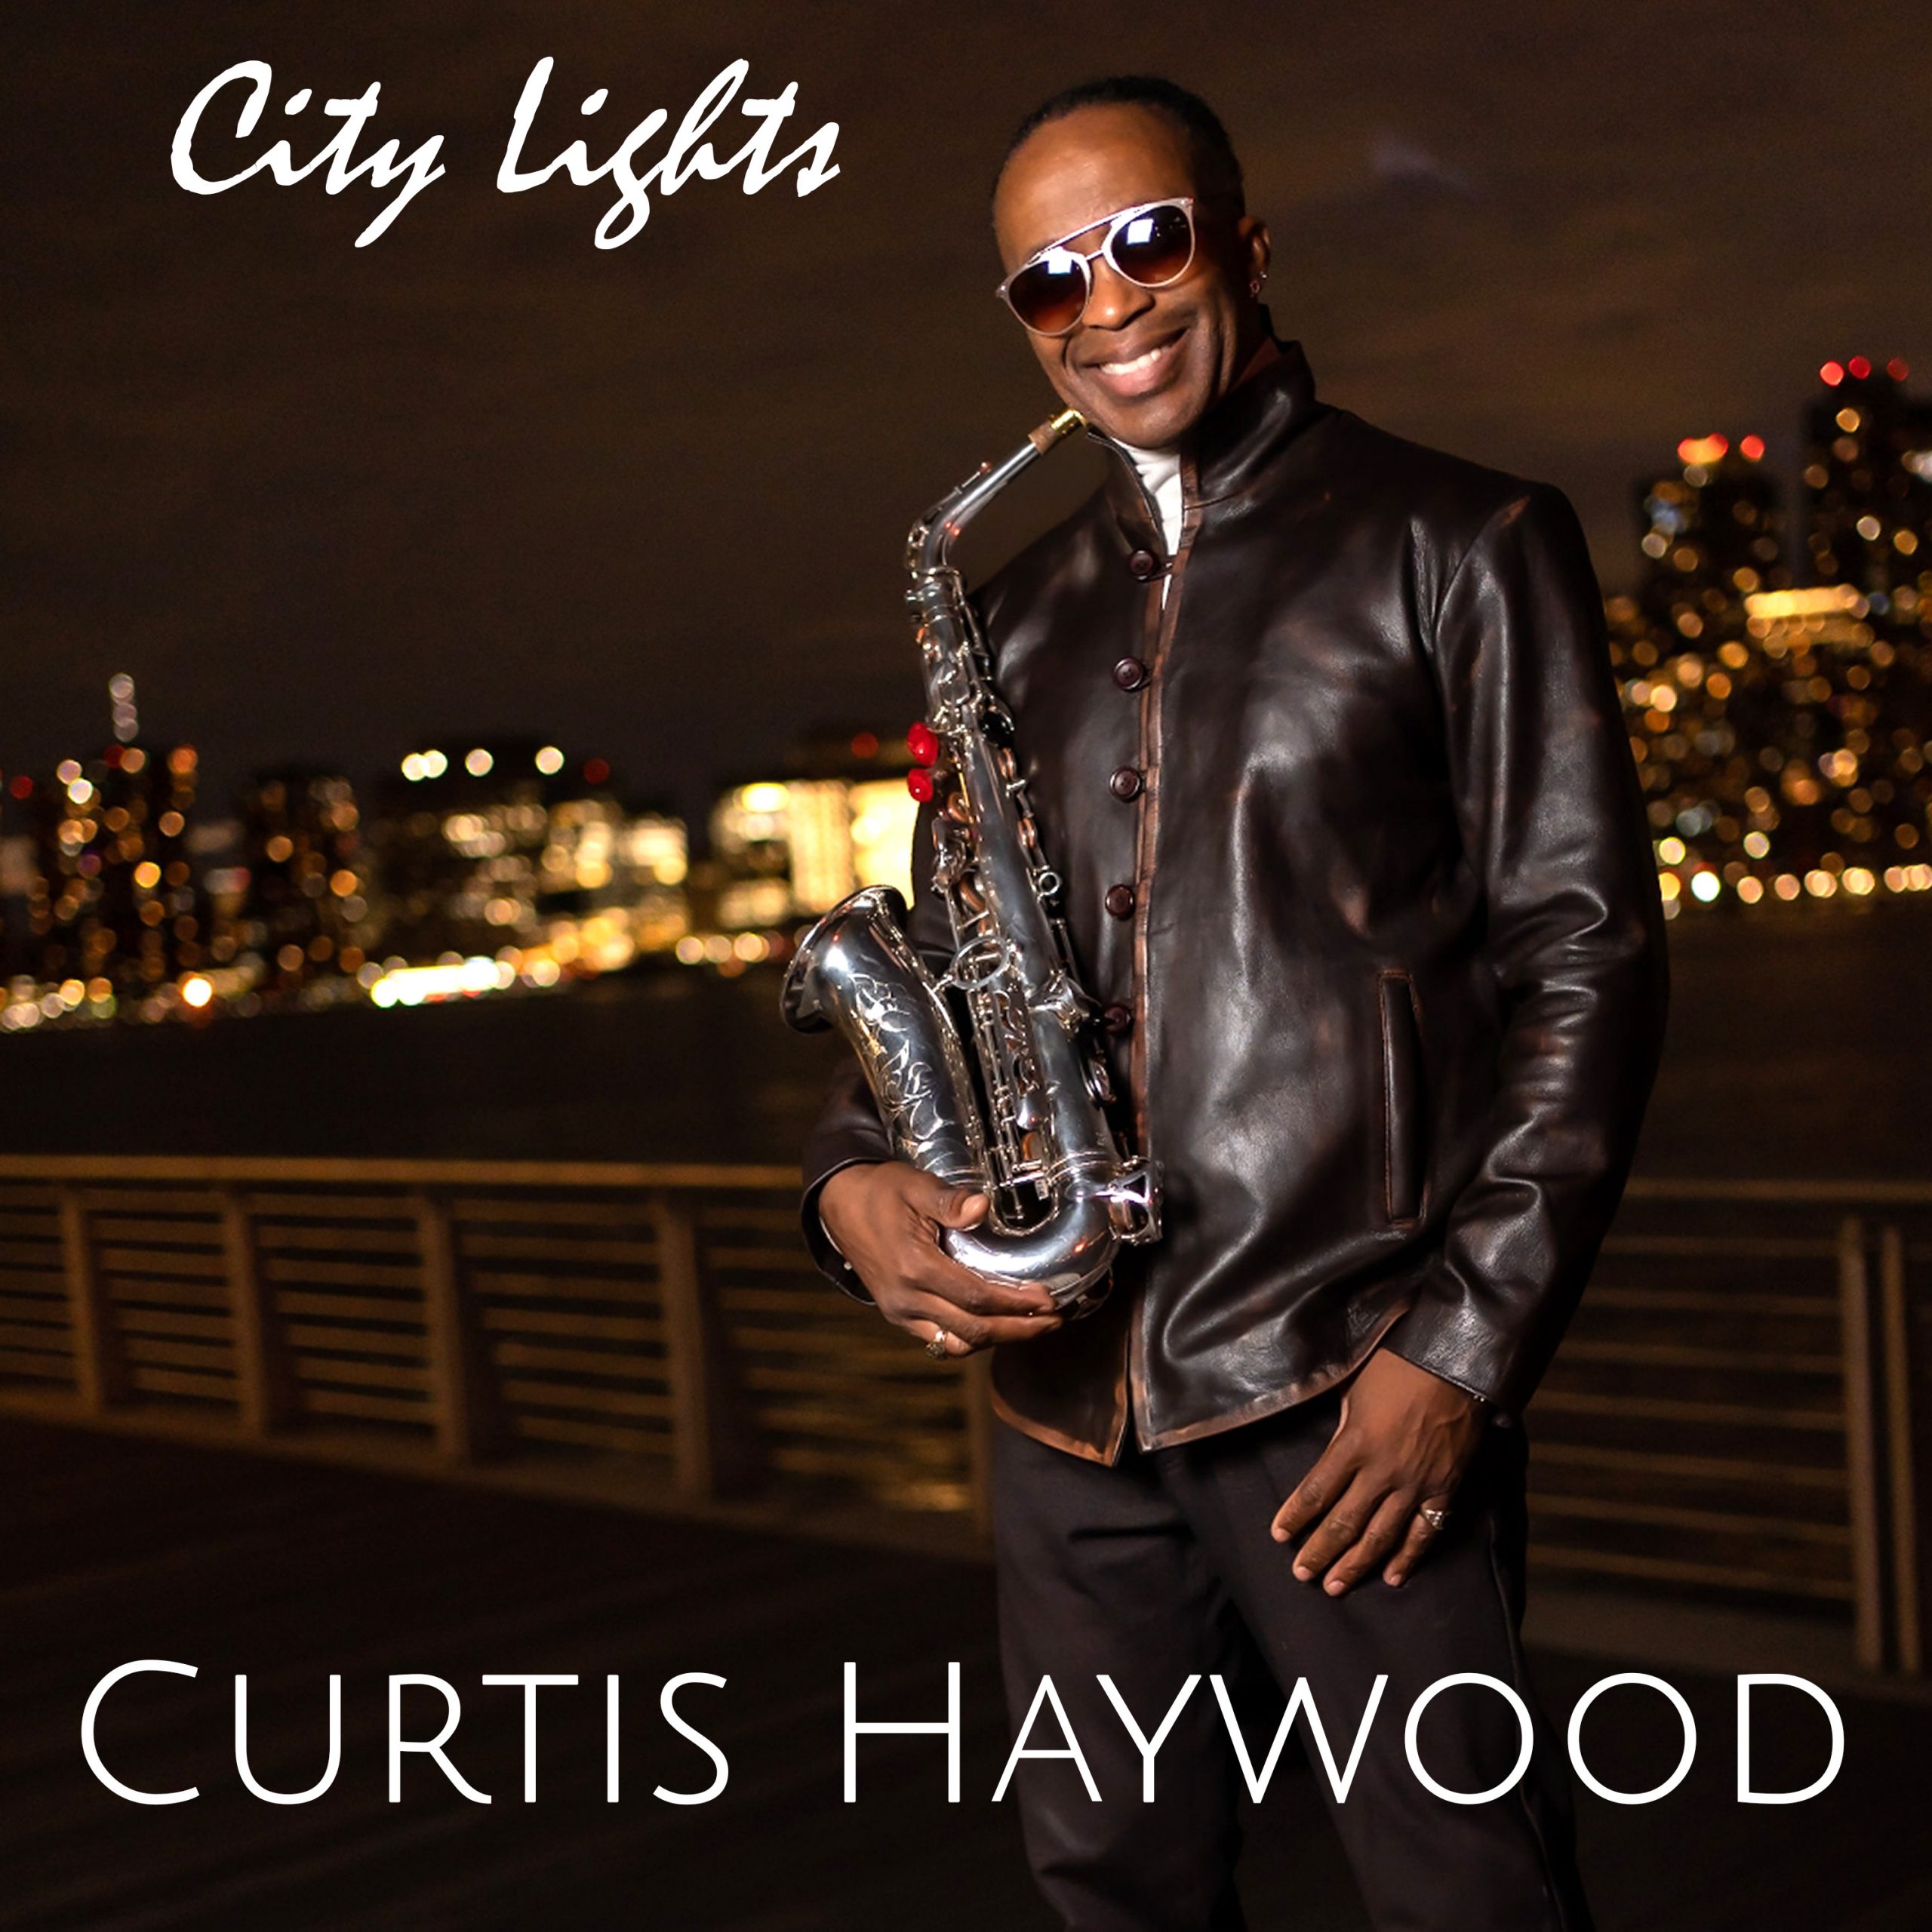 Single of The Week: Curtis Haywood’s Debut Solo Release: “City Lights”